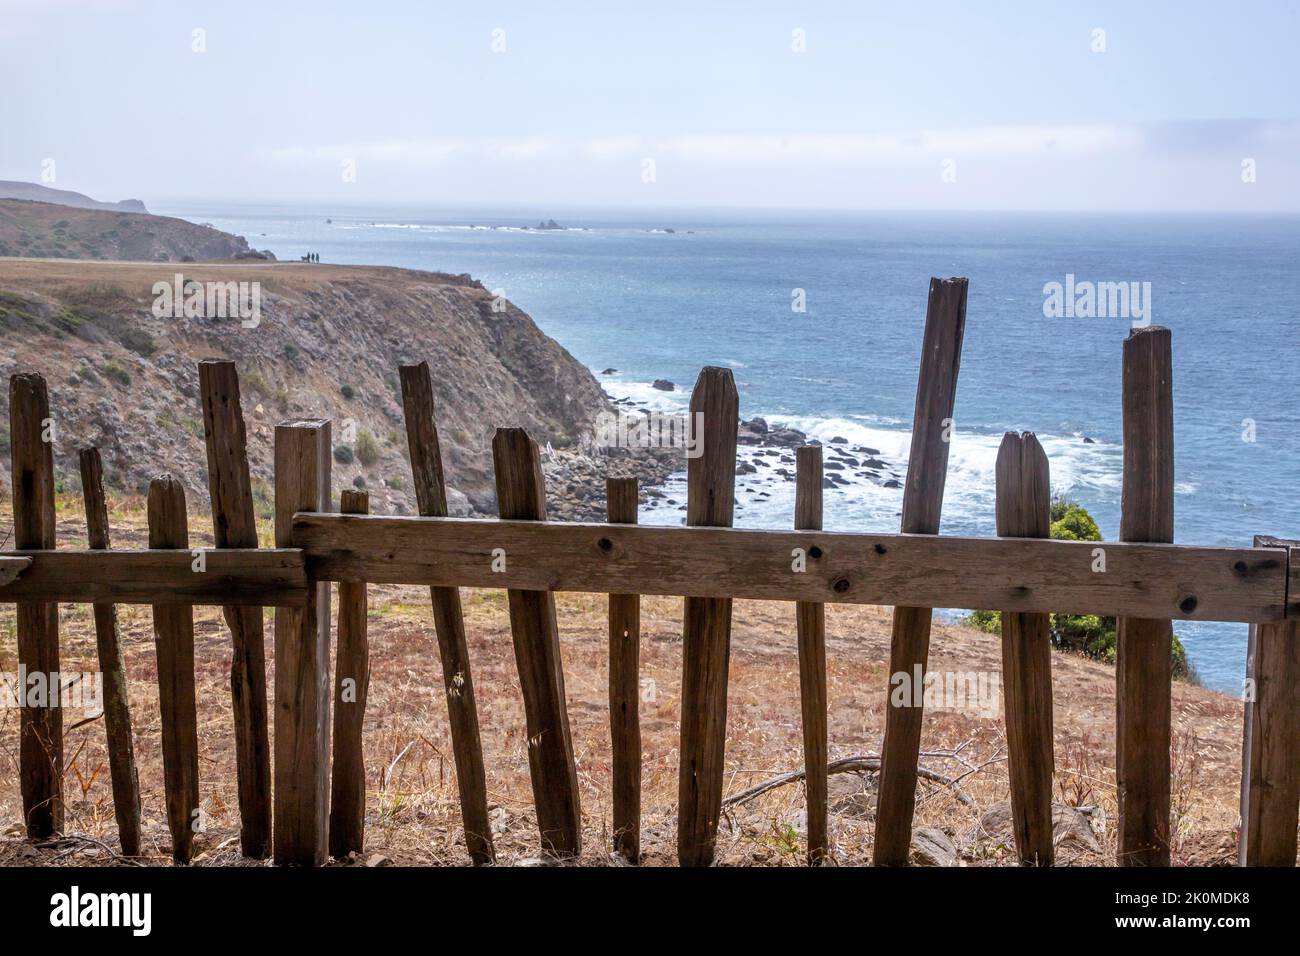 Fort Ross is an historic Russian fort on Highway 1 in Sonoma County. in Northern California. Stock Photo